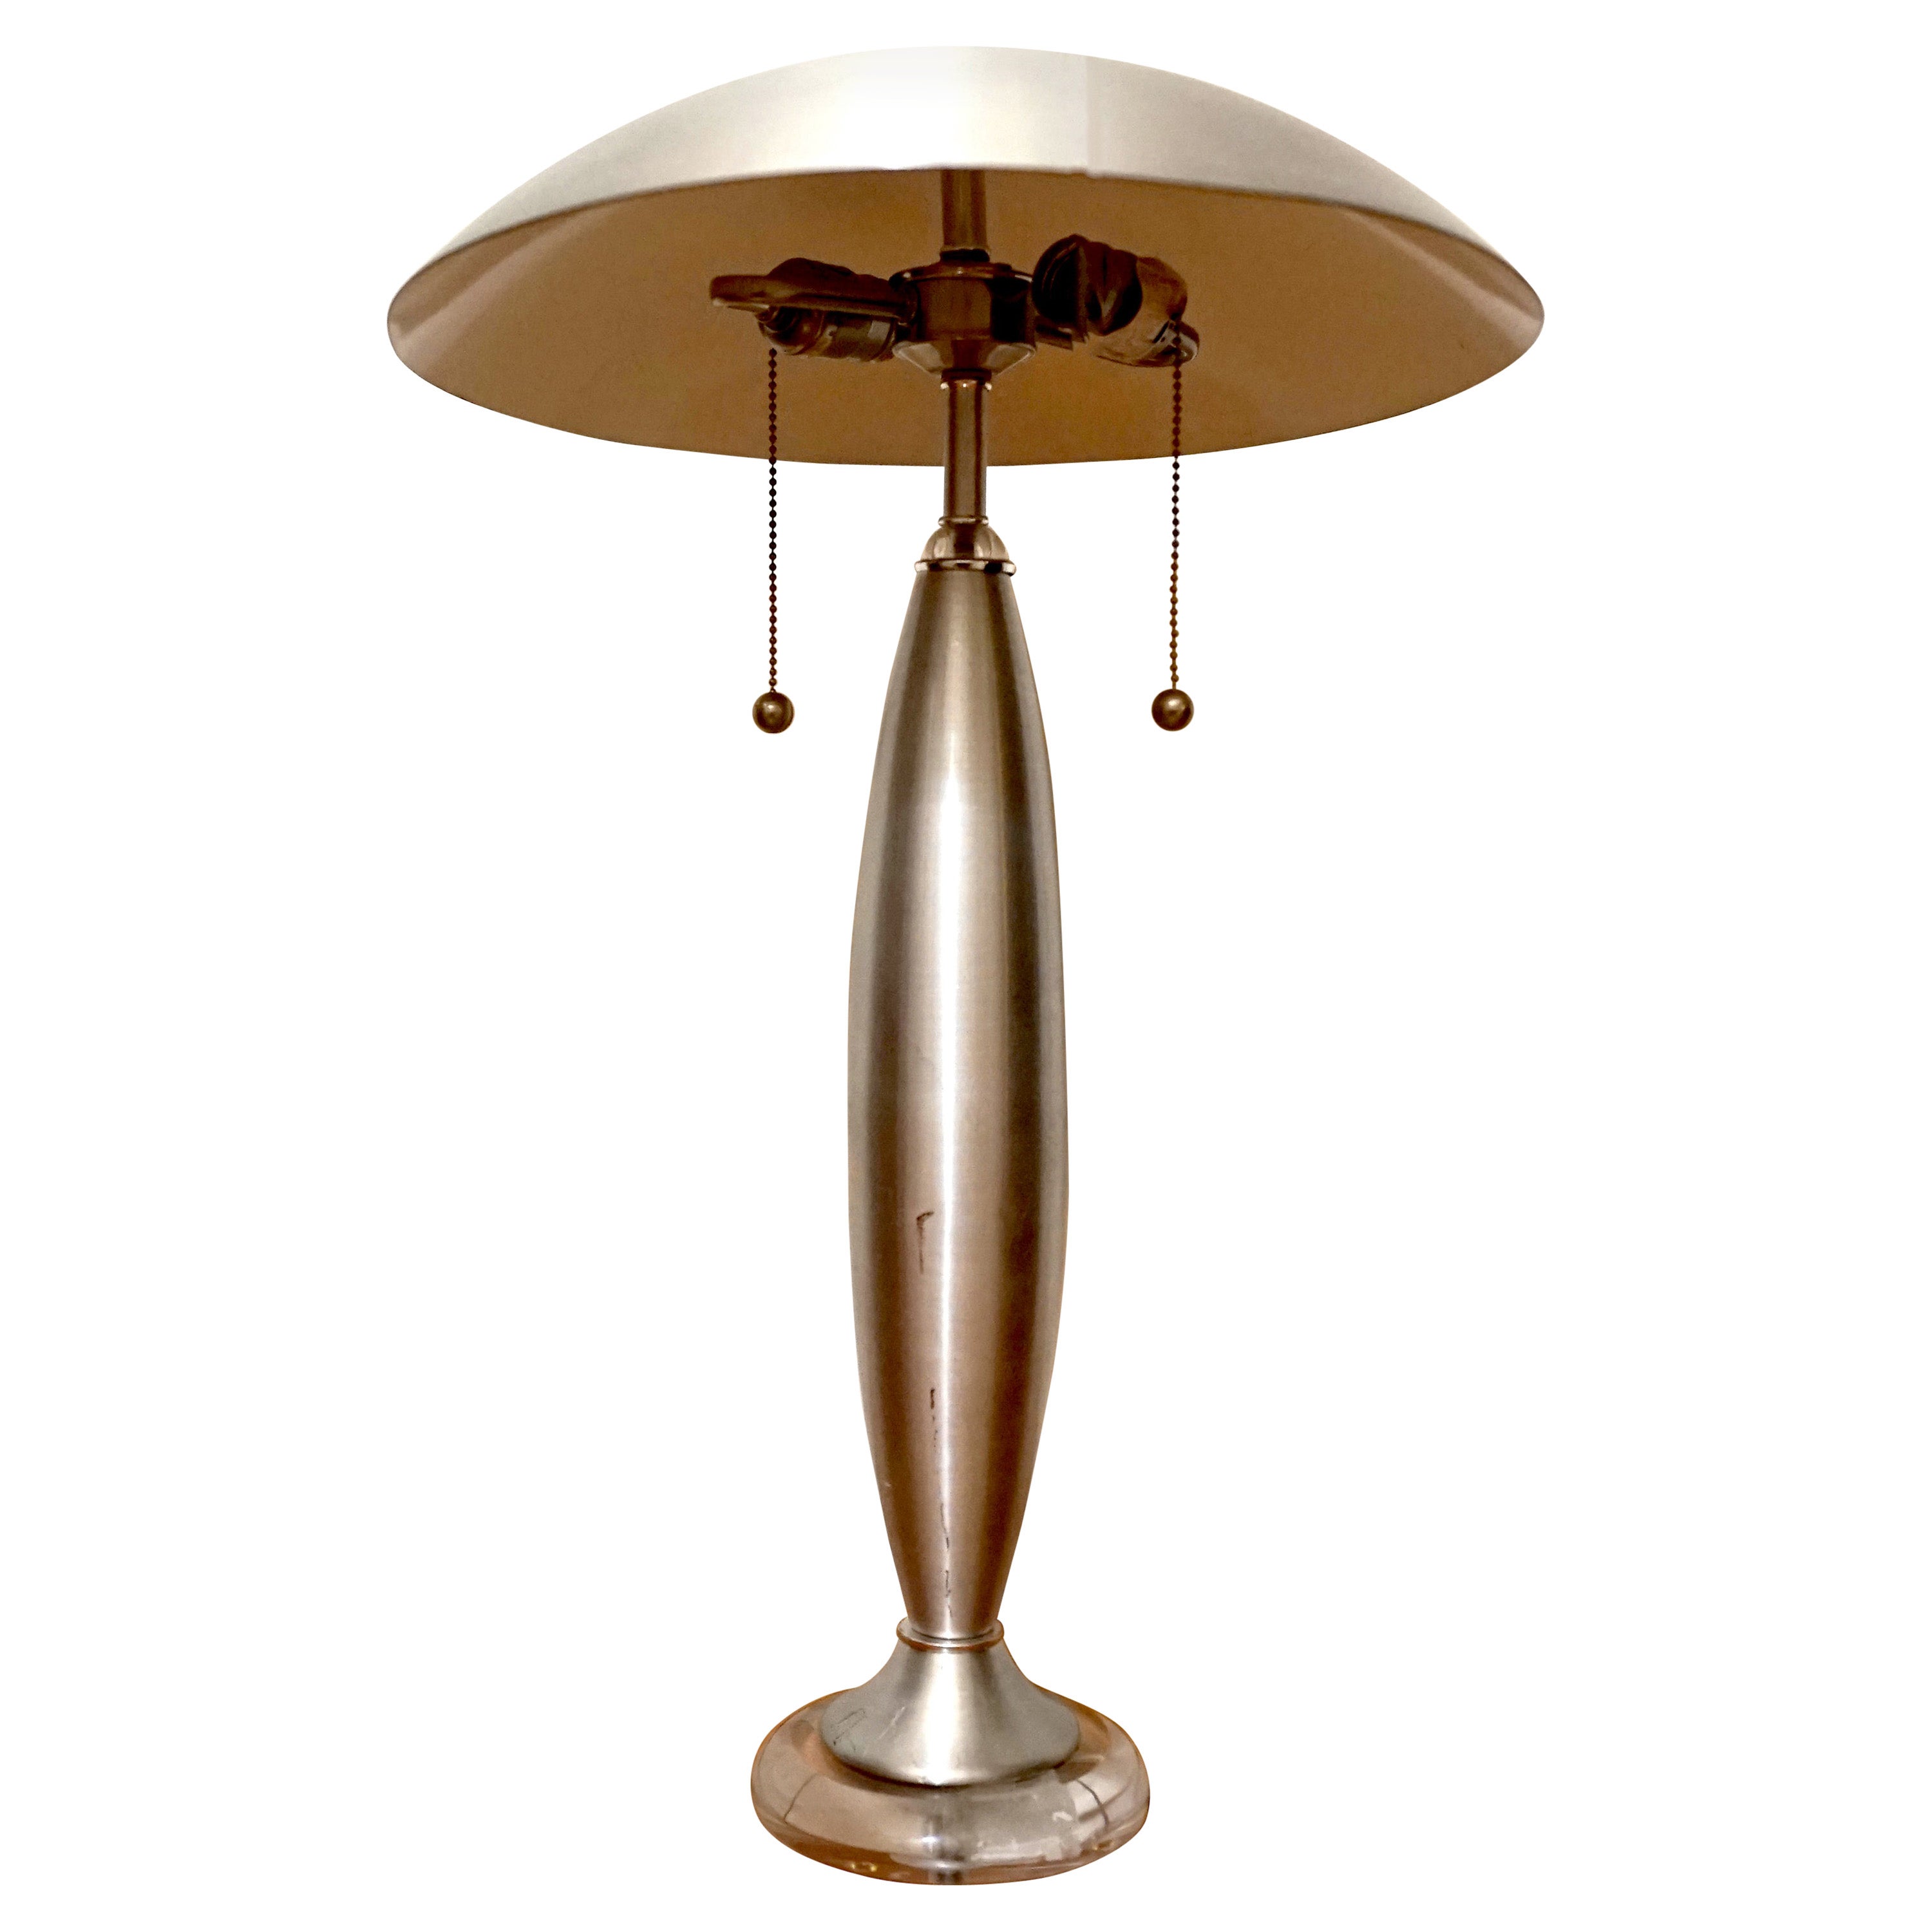 Vintage Domed Brushed Steel, Chrome Table Lamp in the Style of Laurel Lamp Co For Sale